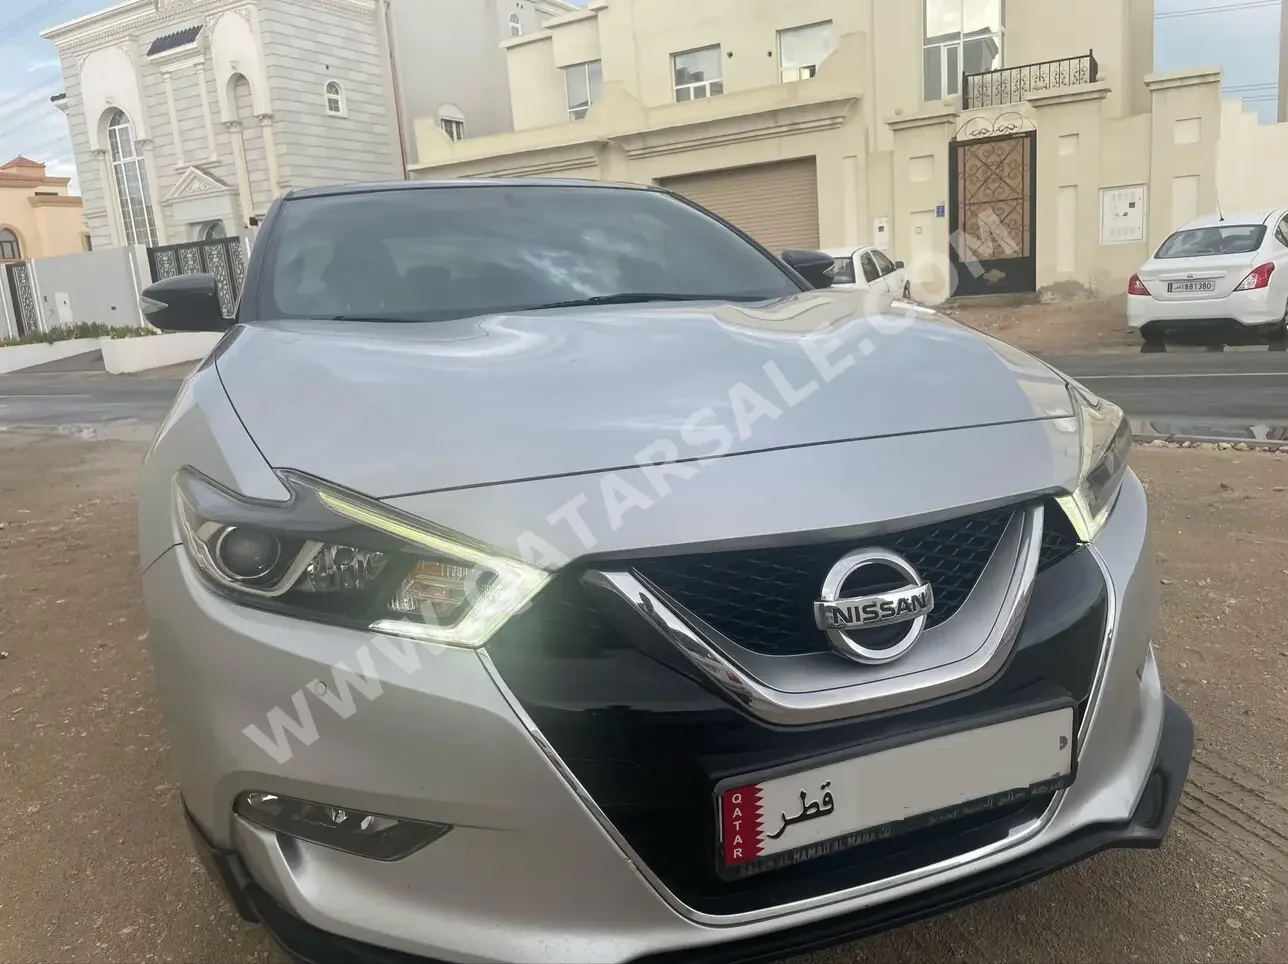 Nissan  Maxima  SV  2016  Automatic  99,997 Km  6 Cylinder  Front Wheel Drive (FWD)  Sedan  Black and Gray